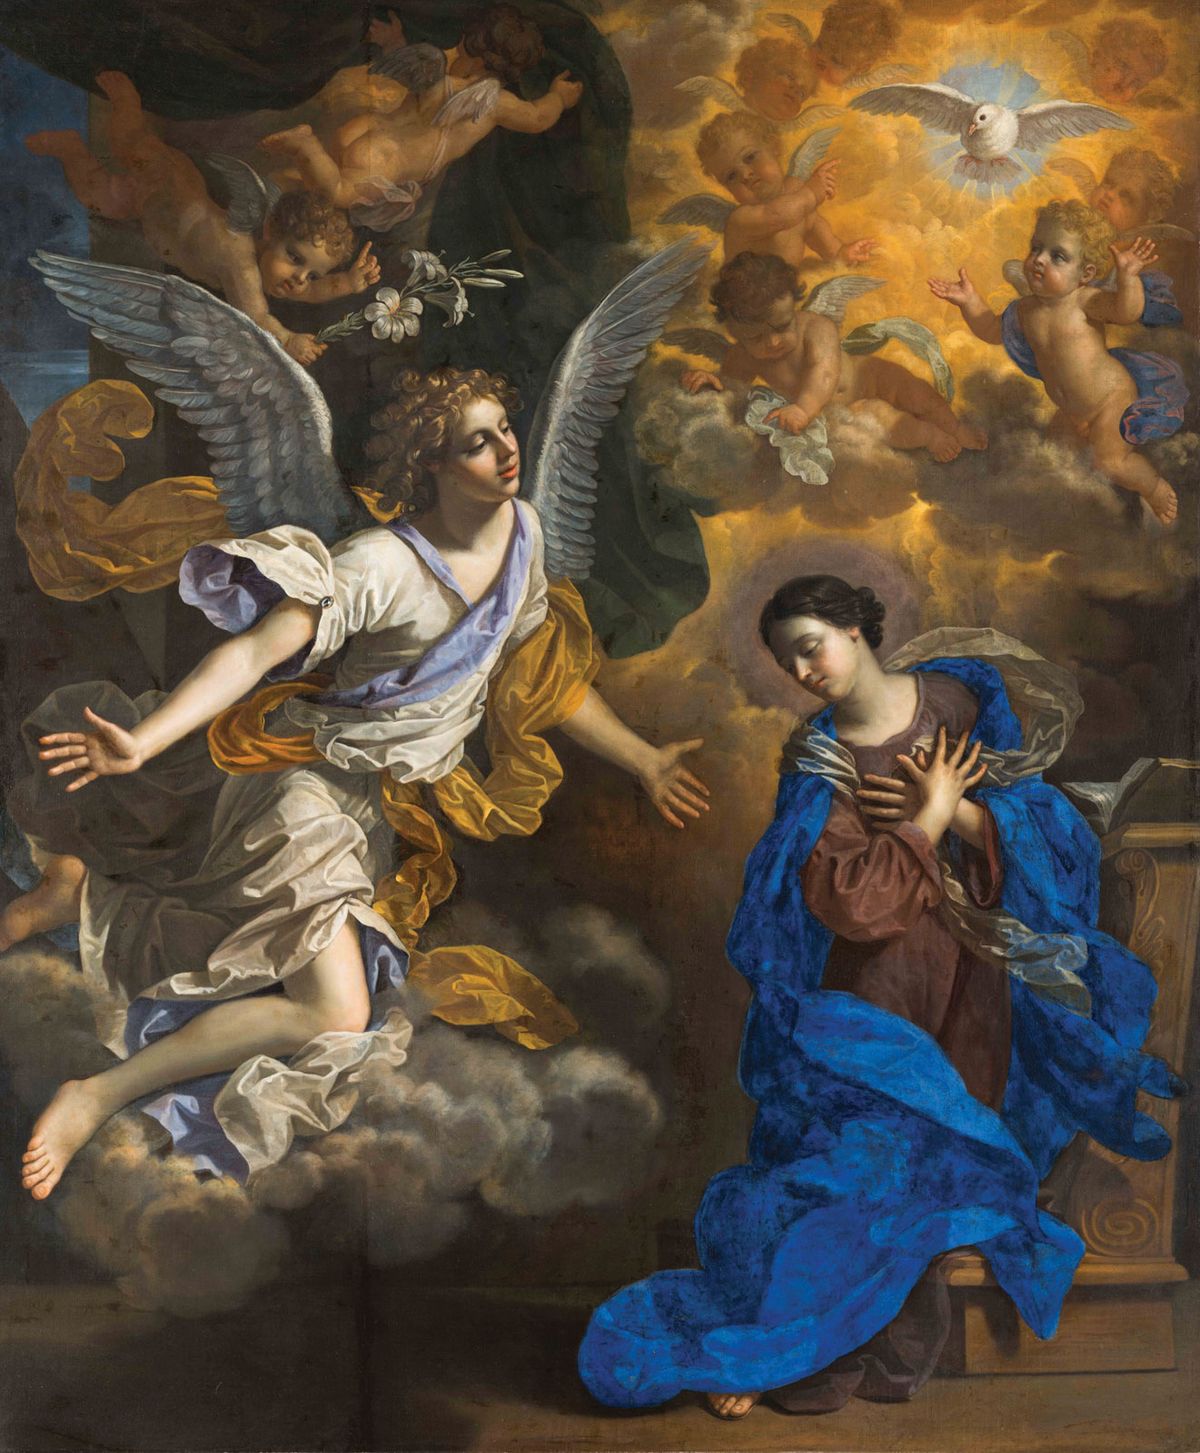 Benedetto Gennari's The Annunciation (1686) The Ringling, Sarasota, Florida. Bequest of John Ringling